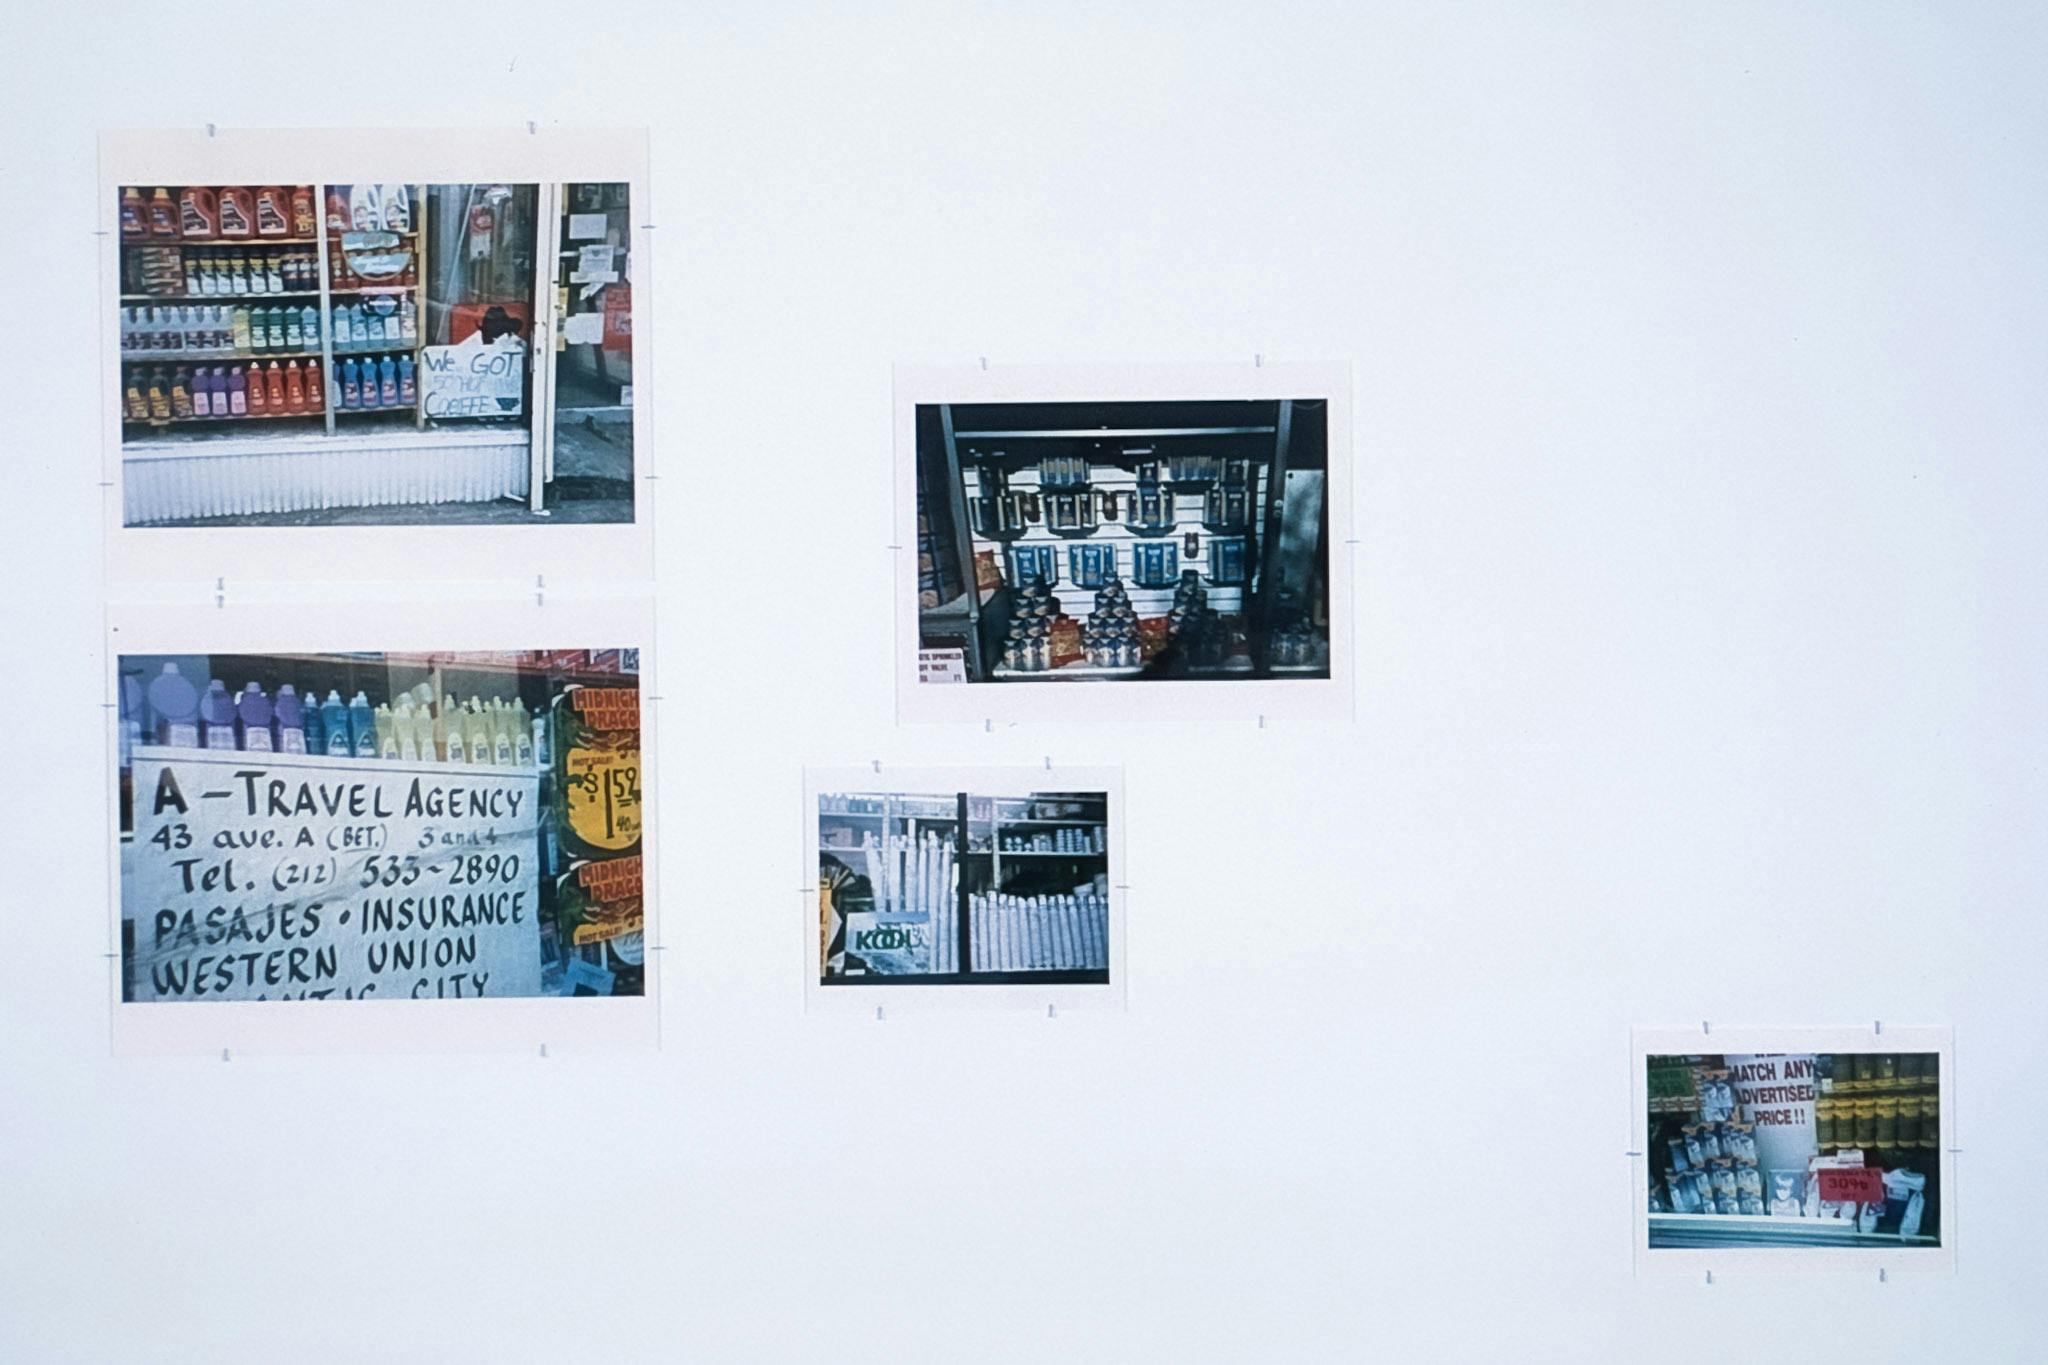 Five coloured photographs of various sizes are displayed on white a wall. All photos depict storefronts. Some have handwritten signs that read, “We Got Coffee” and “Match Any Lower Advertised Price!!”